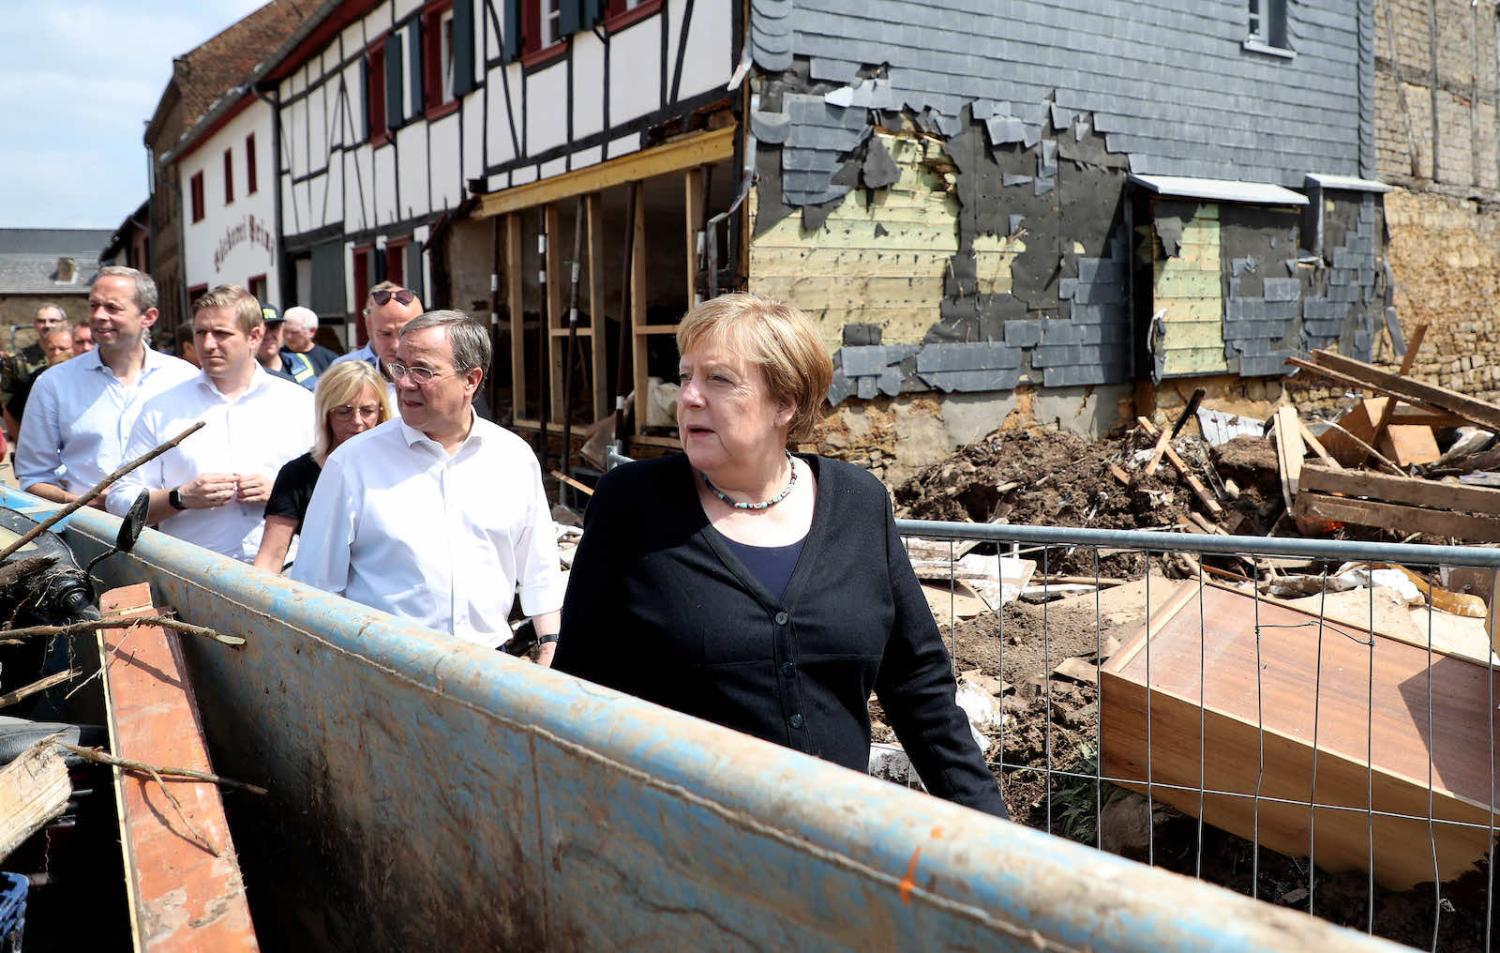 German Chancellor Angela Merkel inspecting damage after heavy flooding in the village of Bad Muenstereifel on 20 July. Merkel was accompanied by Armin Laschet, seen as a favourite to take over the chancellor position (Friedemann Vogel via Getty Images)